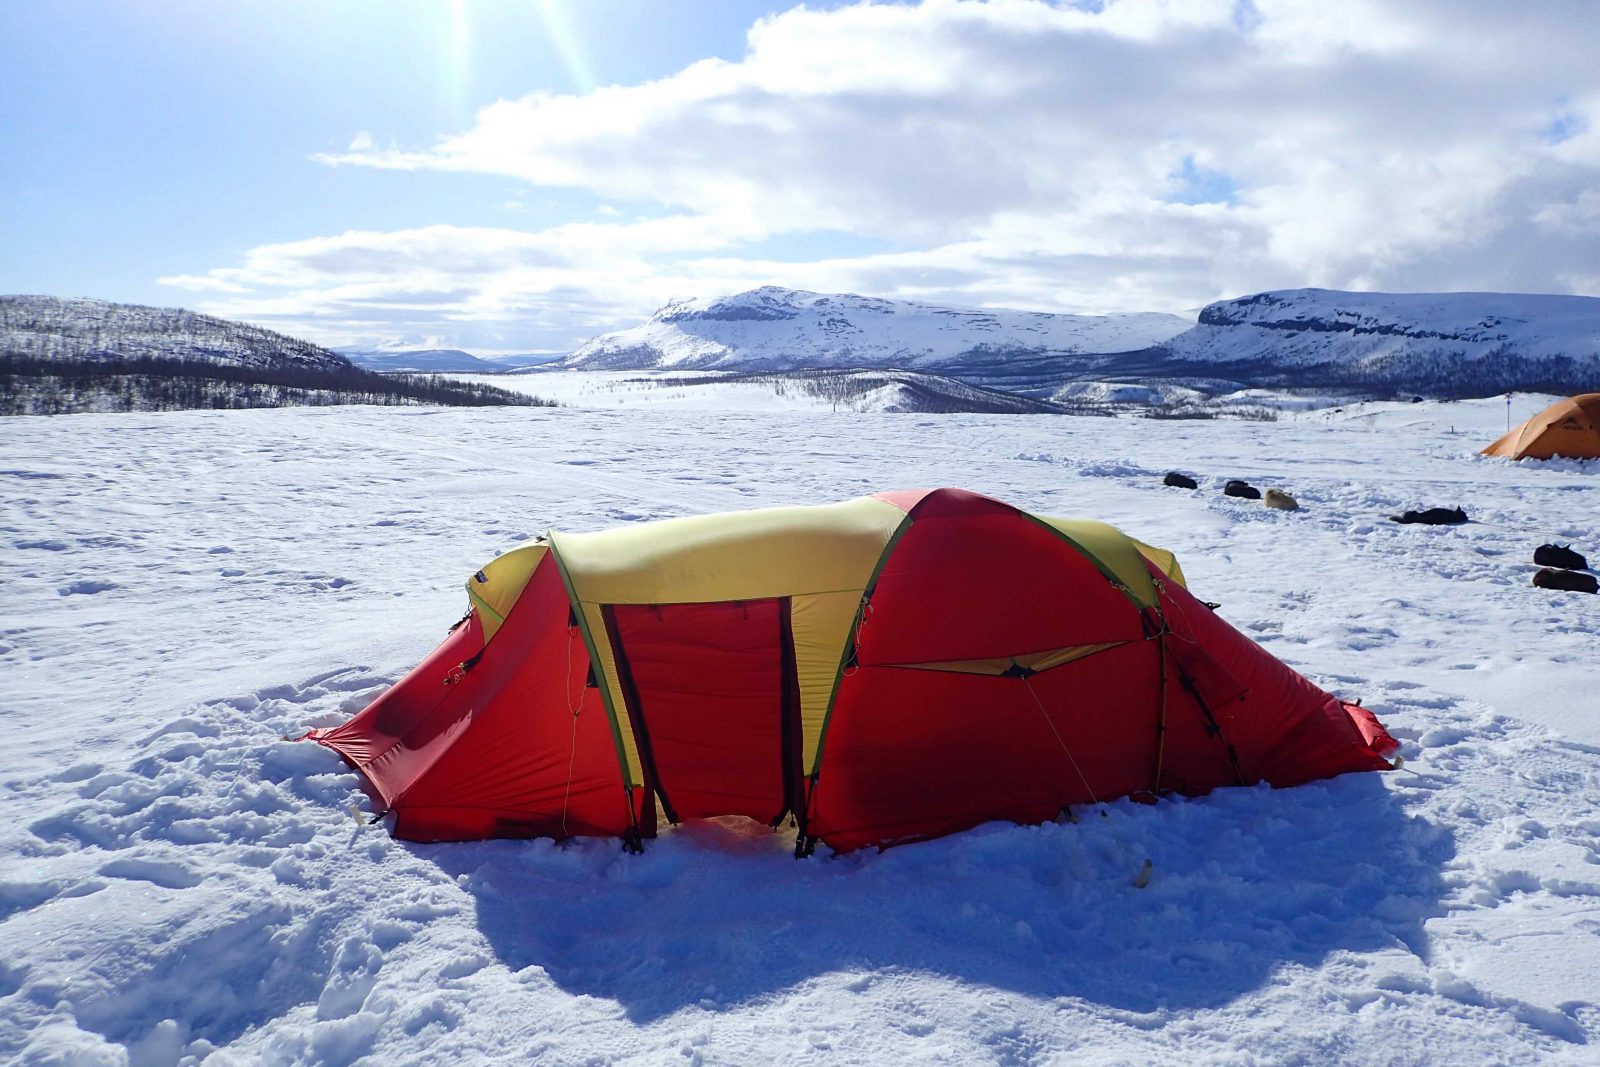 A tent in the Arctic circle, surrounded by snow and mountains.